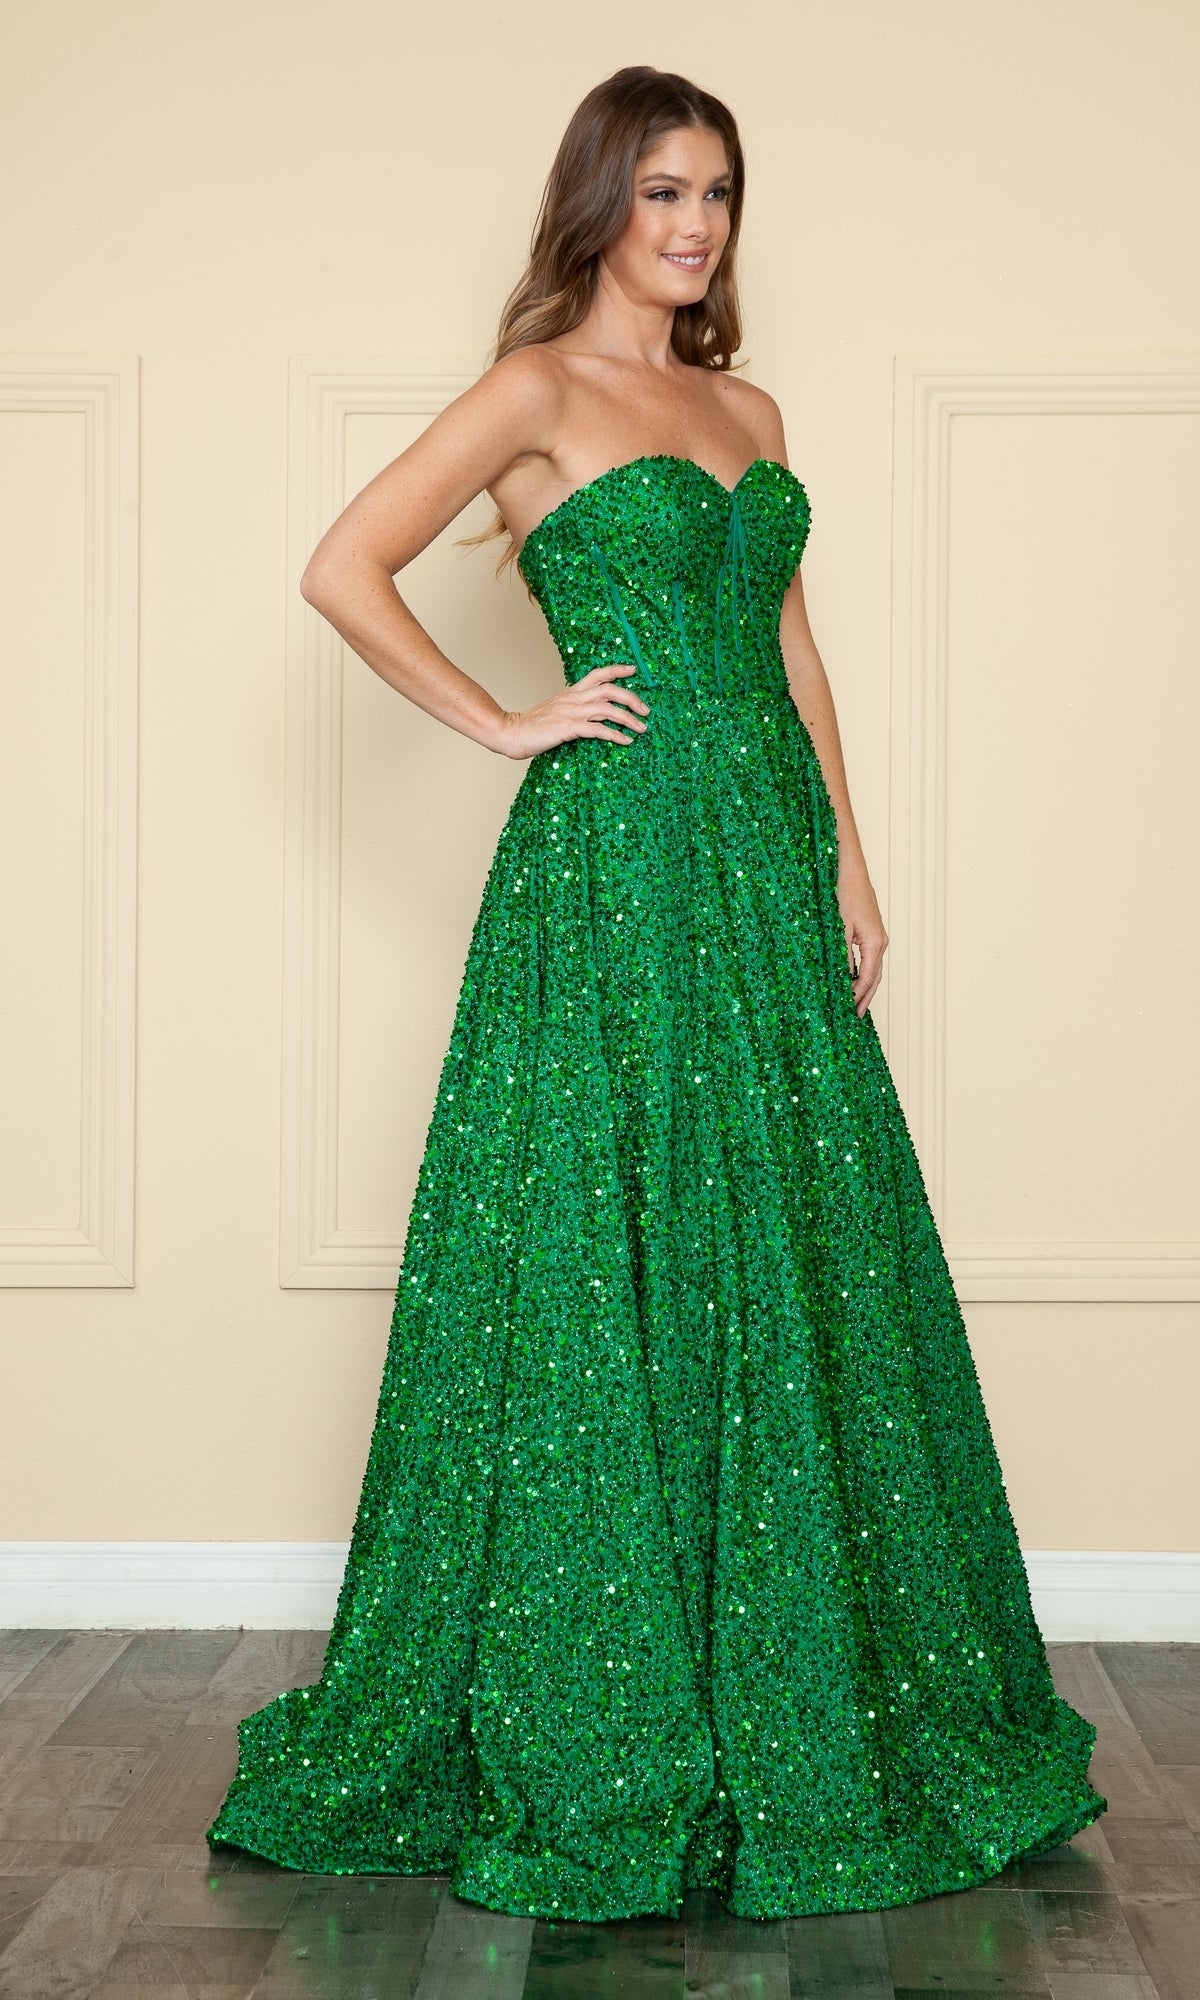 Long Prom Dress 9152 by Poly USA